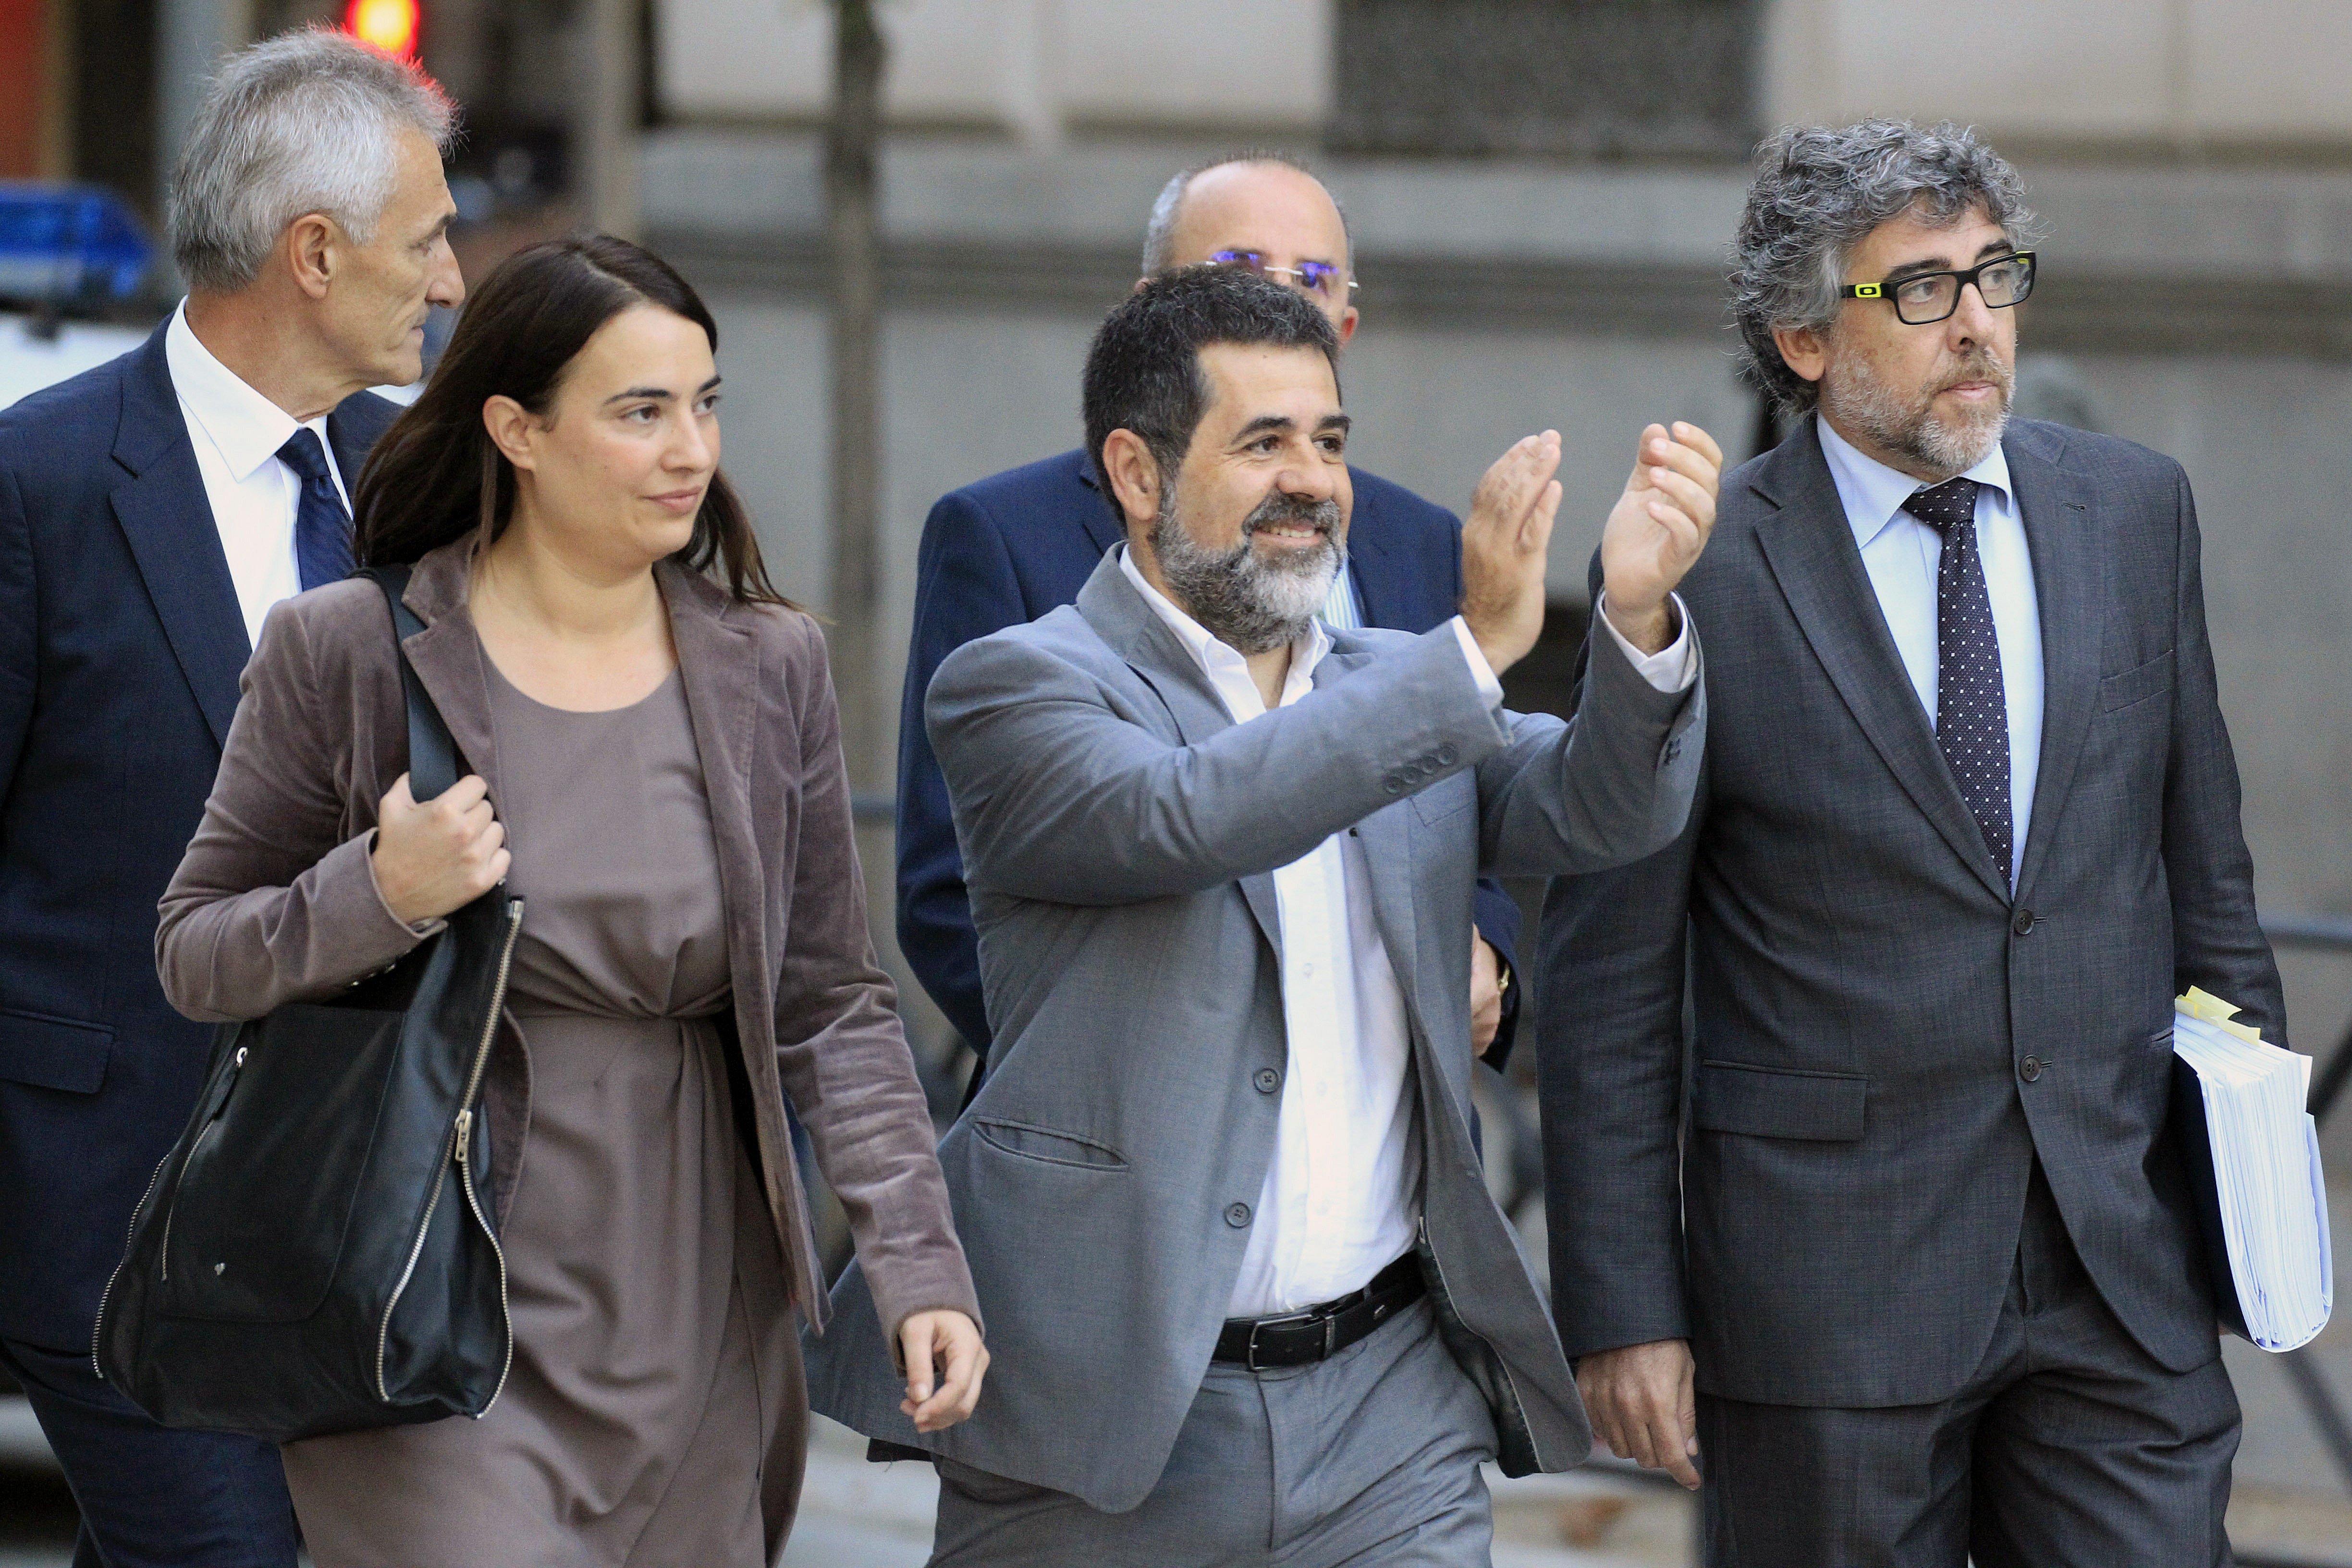 Jordi Sànchez, from prison: "Look for agreement to the last moment"